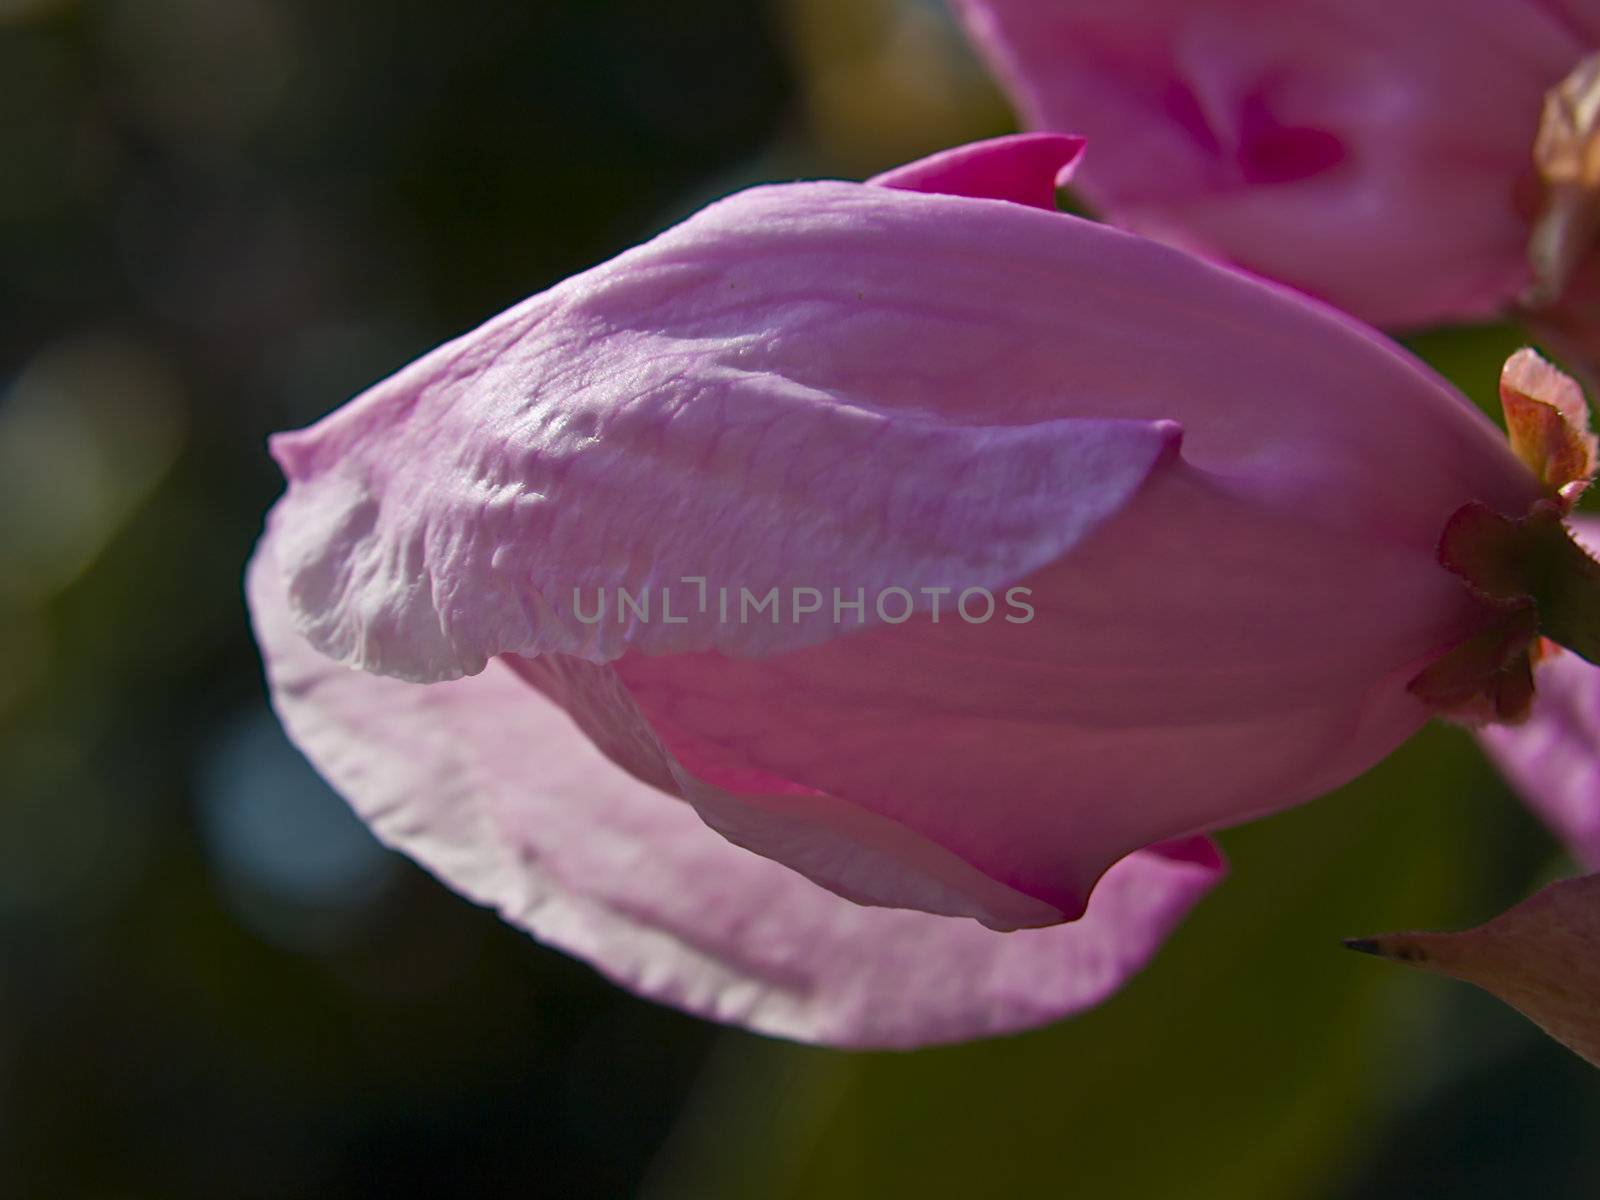 Rhododendron Bud Up Close by Downart